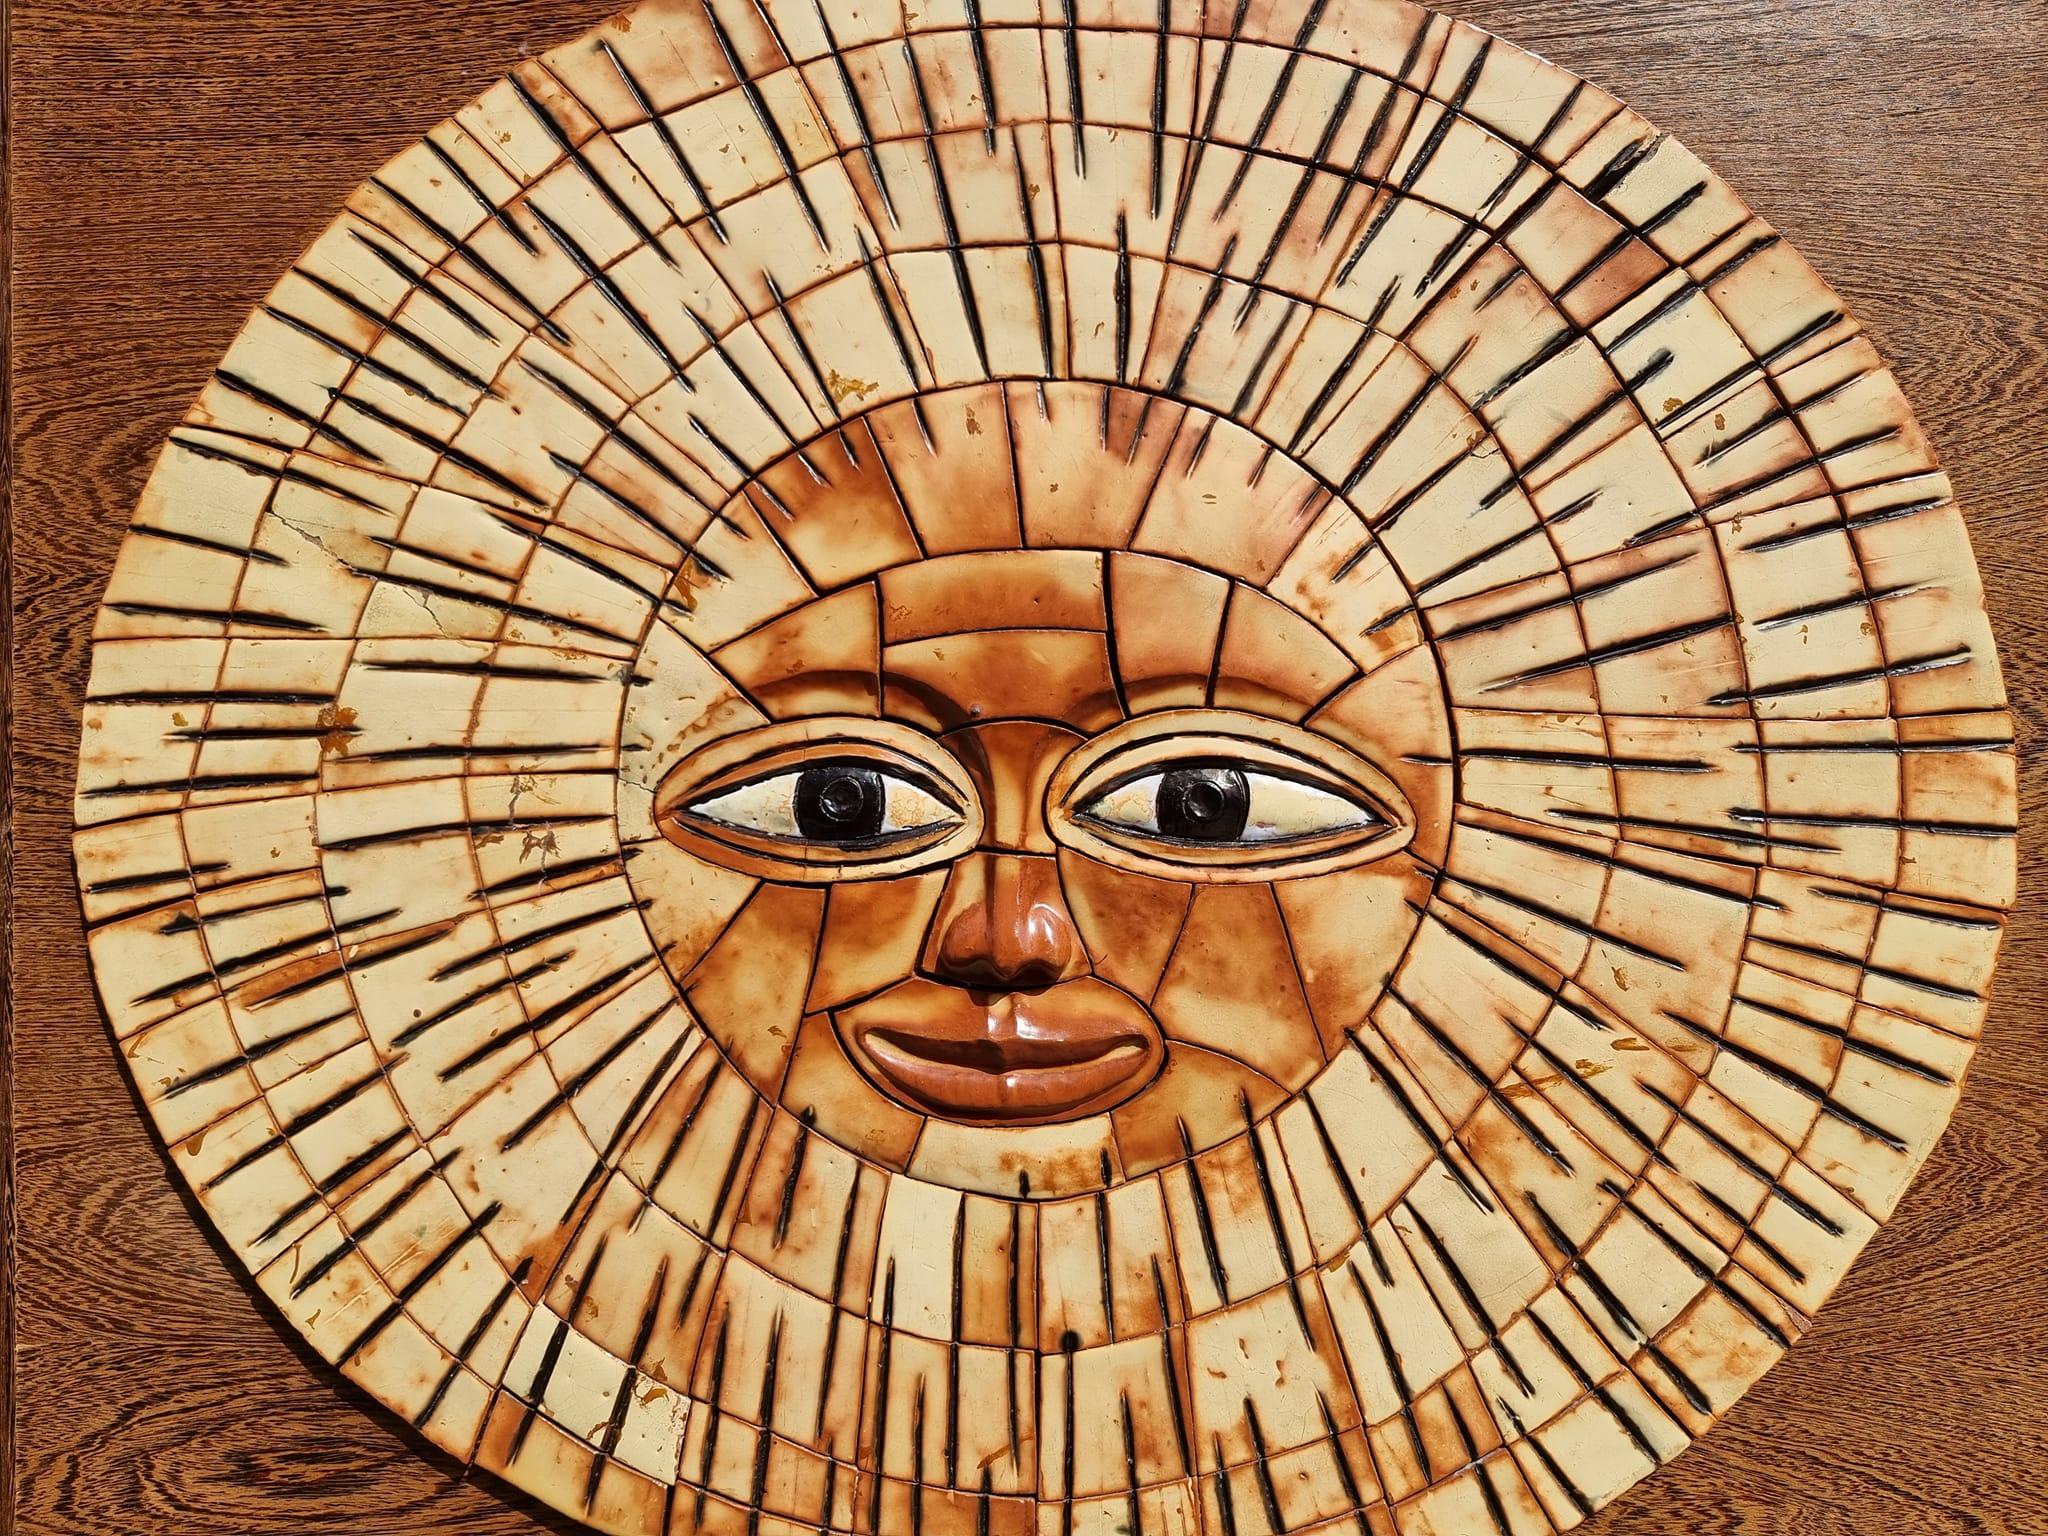 Large Mid-20th century ceramic figural sun face wall art sculpture.The ceramic Face Sun is amazingly detailed in vibrant colors and will make a great addition to any home.

Width 39.7